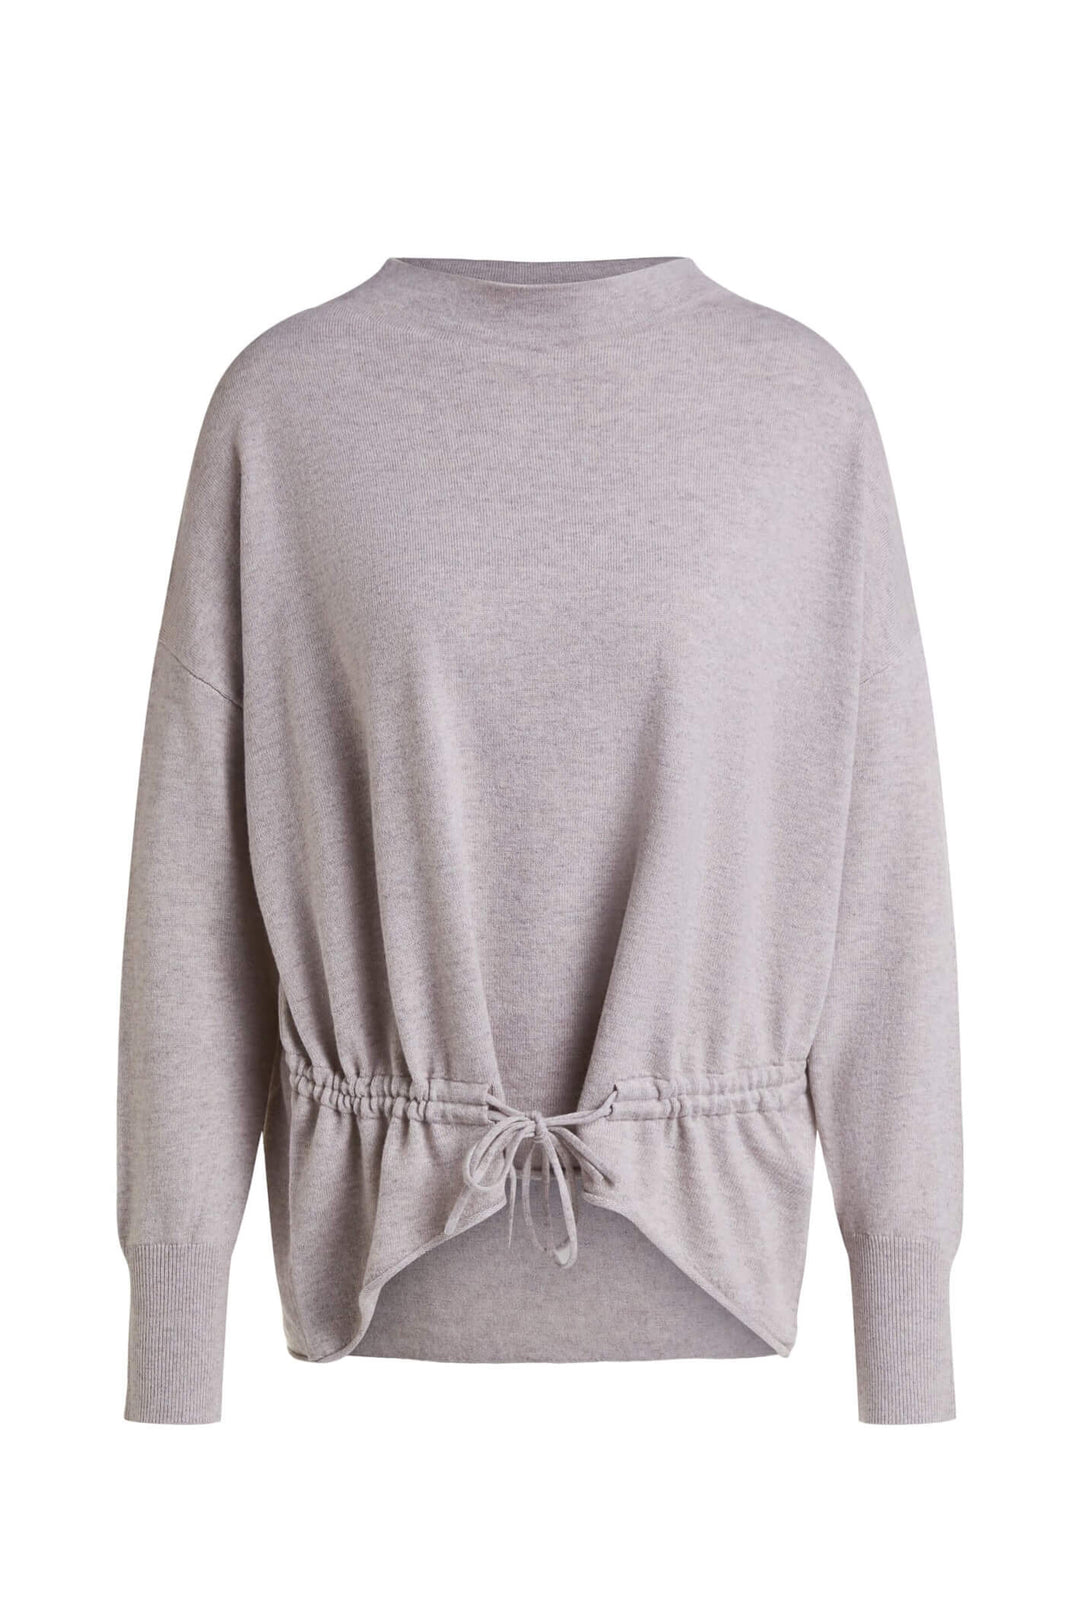 Oui Taupe Drawstring Waist Jumper Front